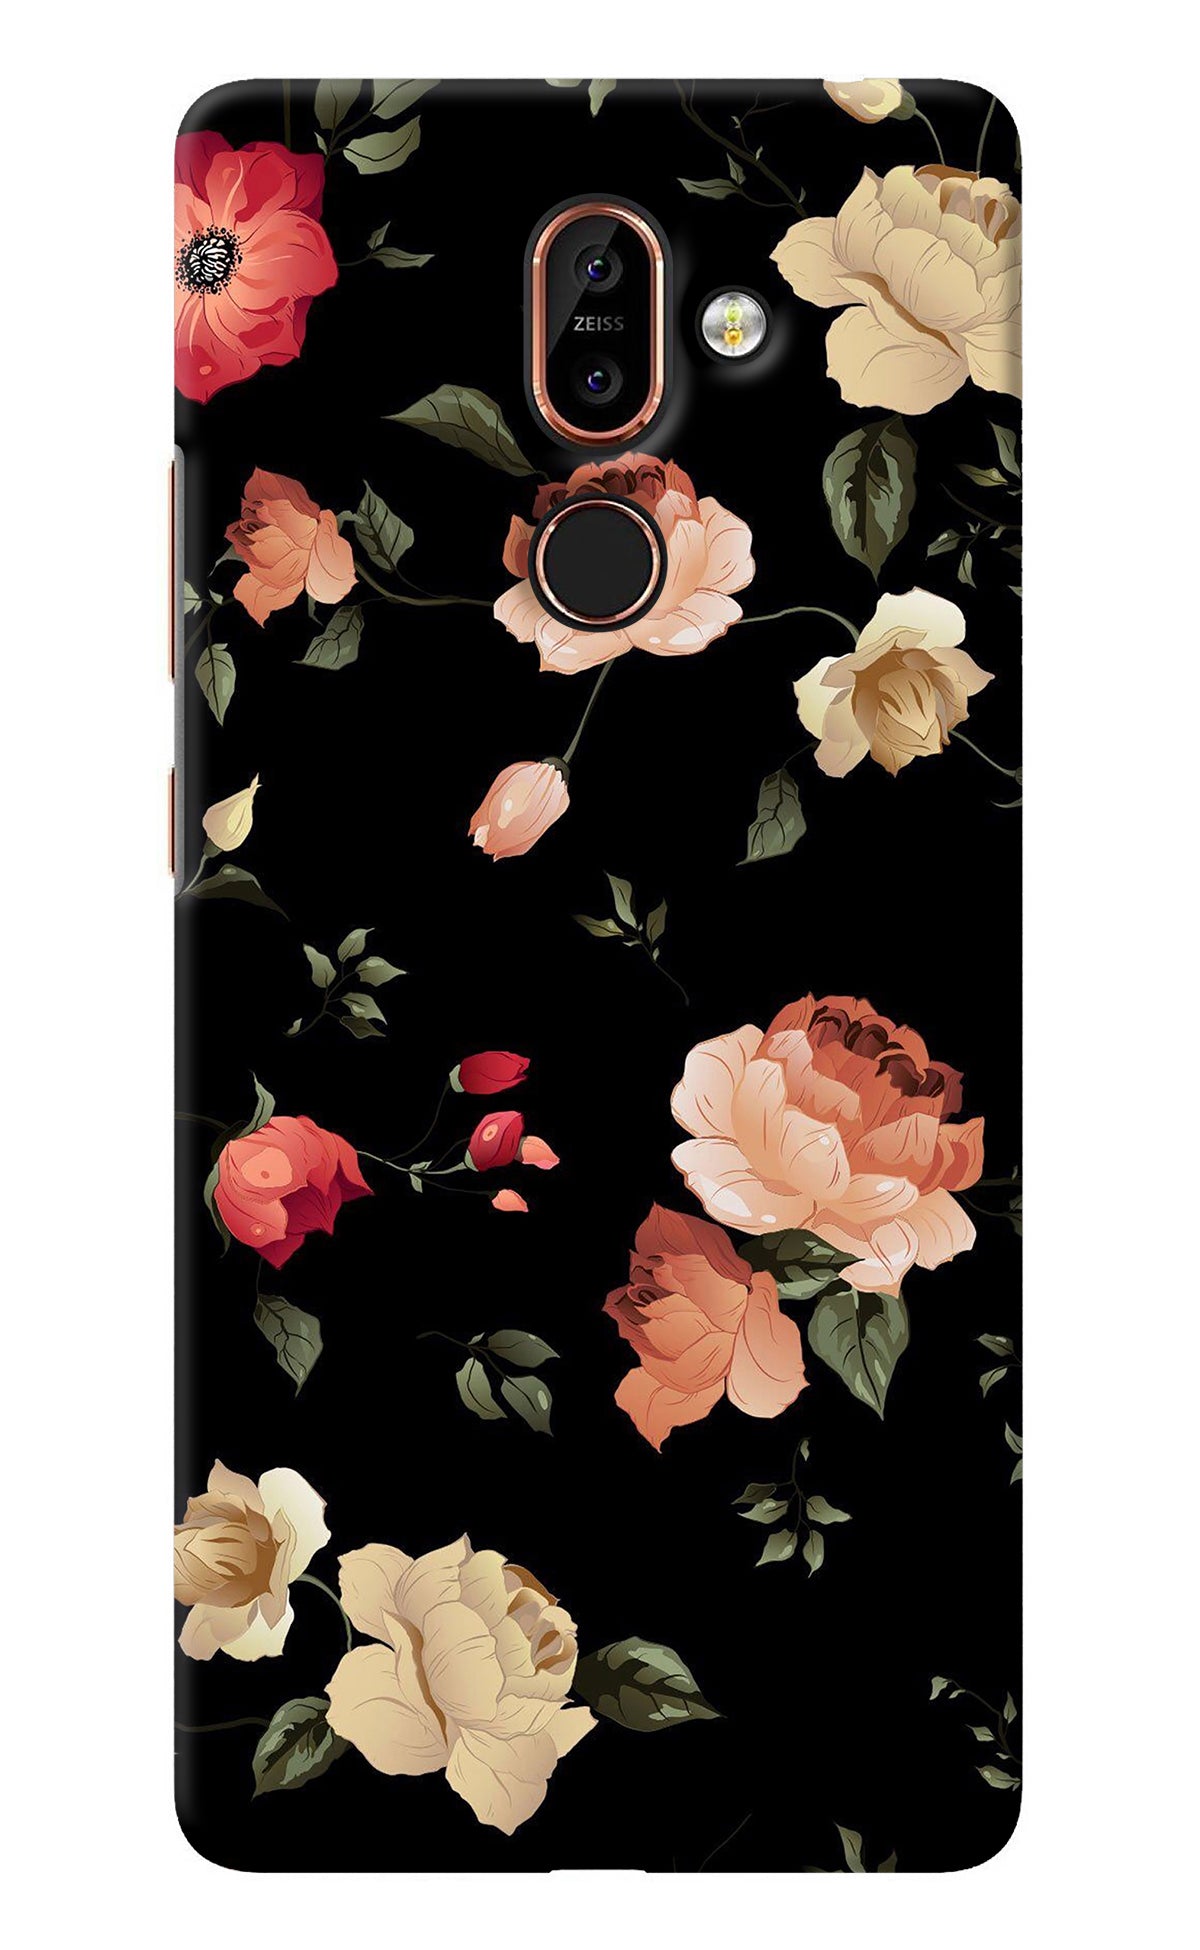 Flowers Nokia 7 Plus Back Cover